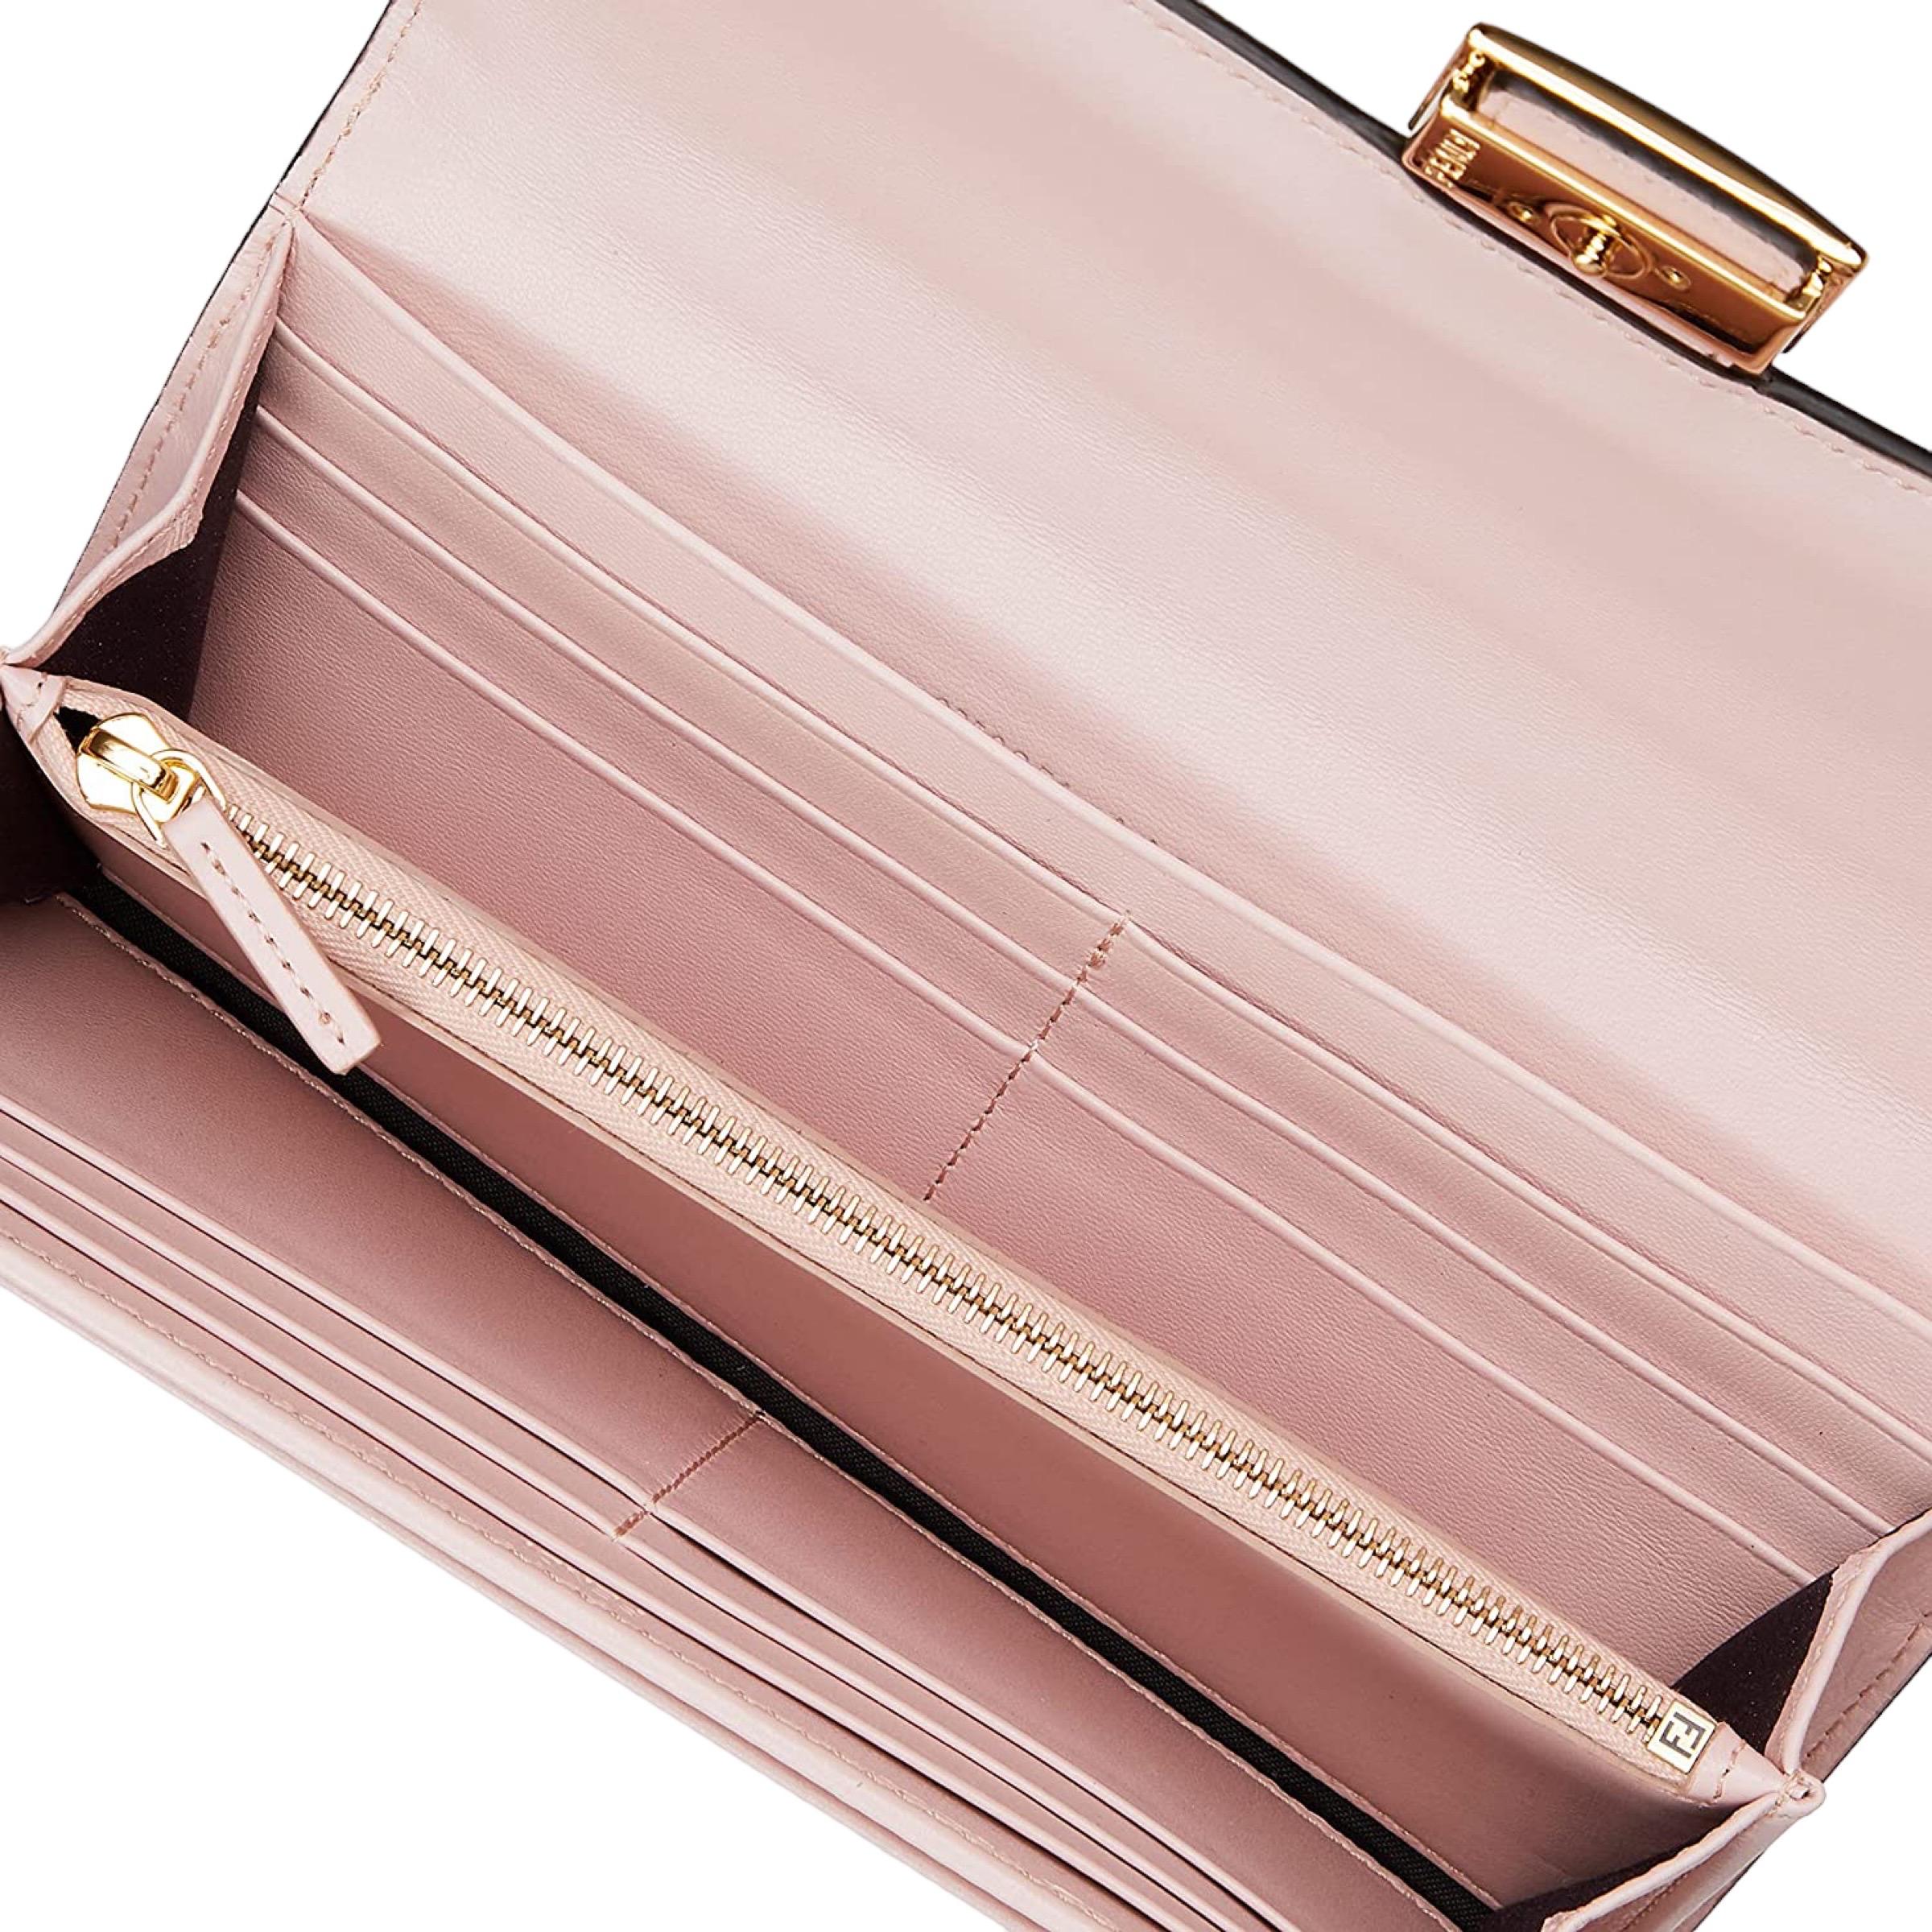 NEW Fendi Candy Pink Baguette FF Monogram Leather Continental Wallet Clutch Bag For Sale 2